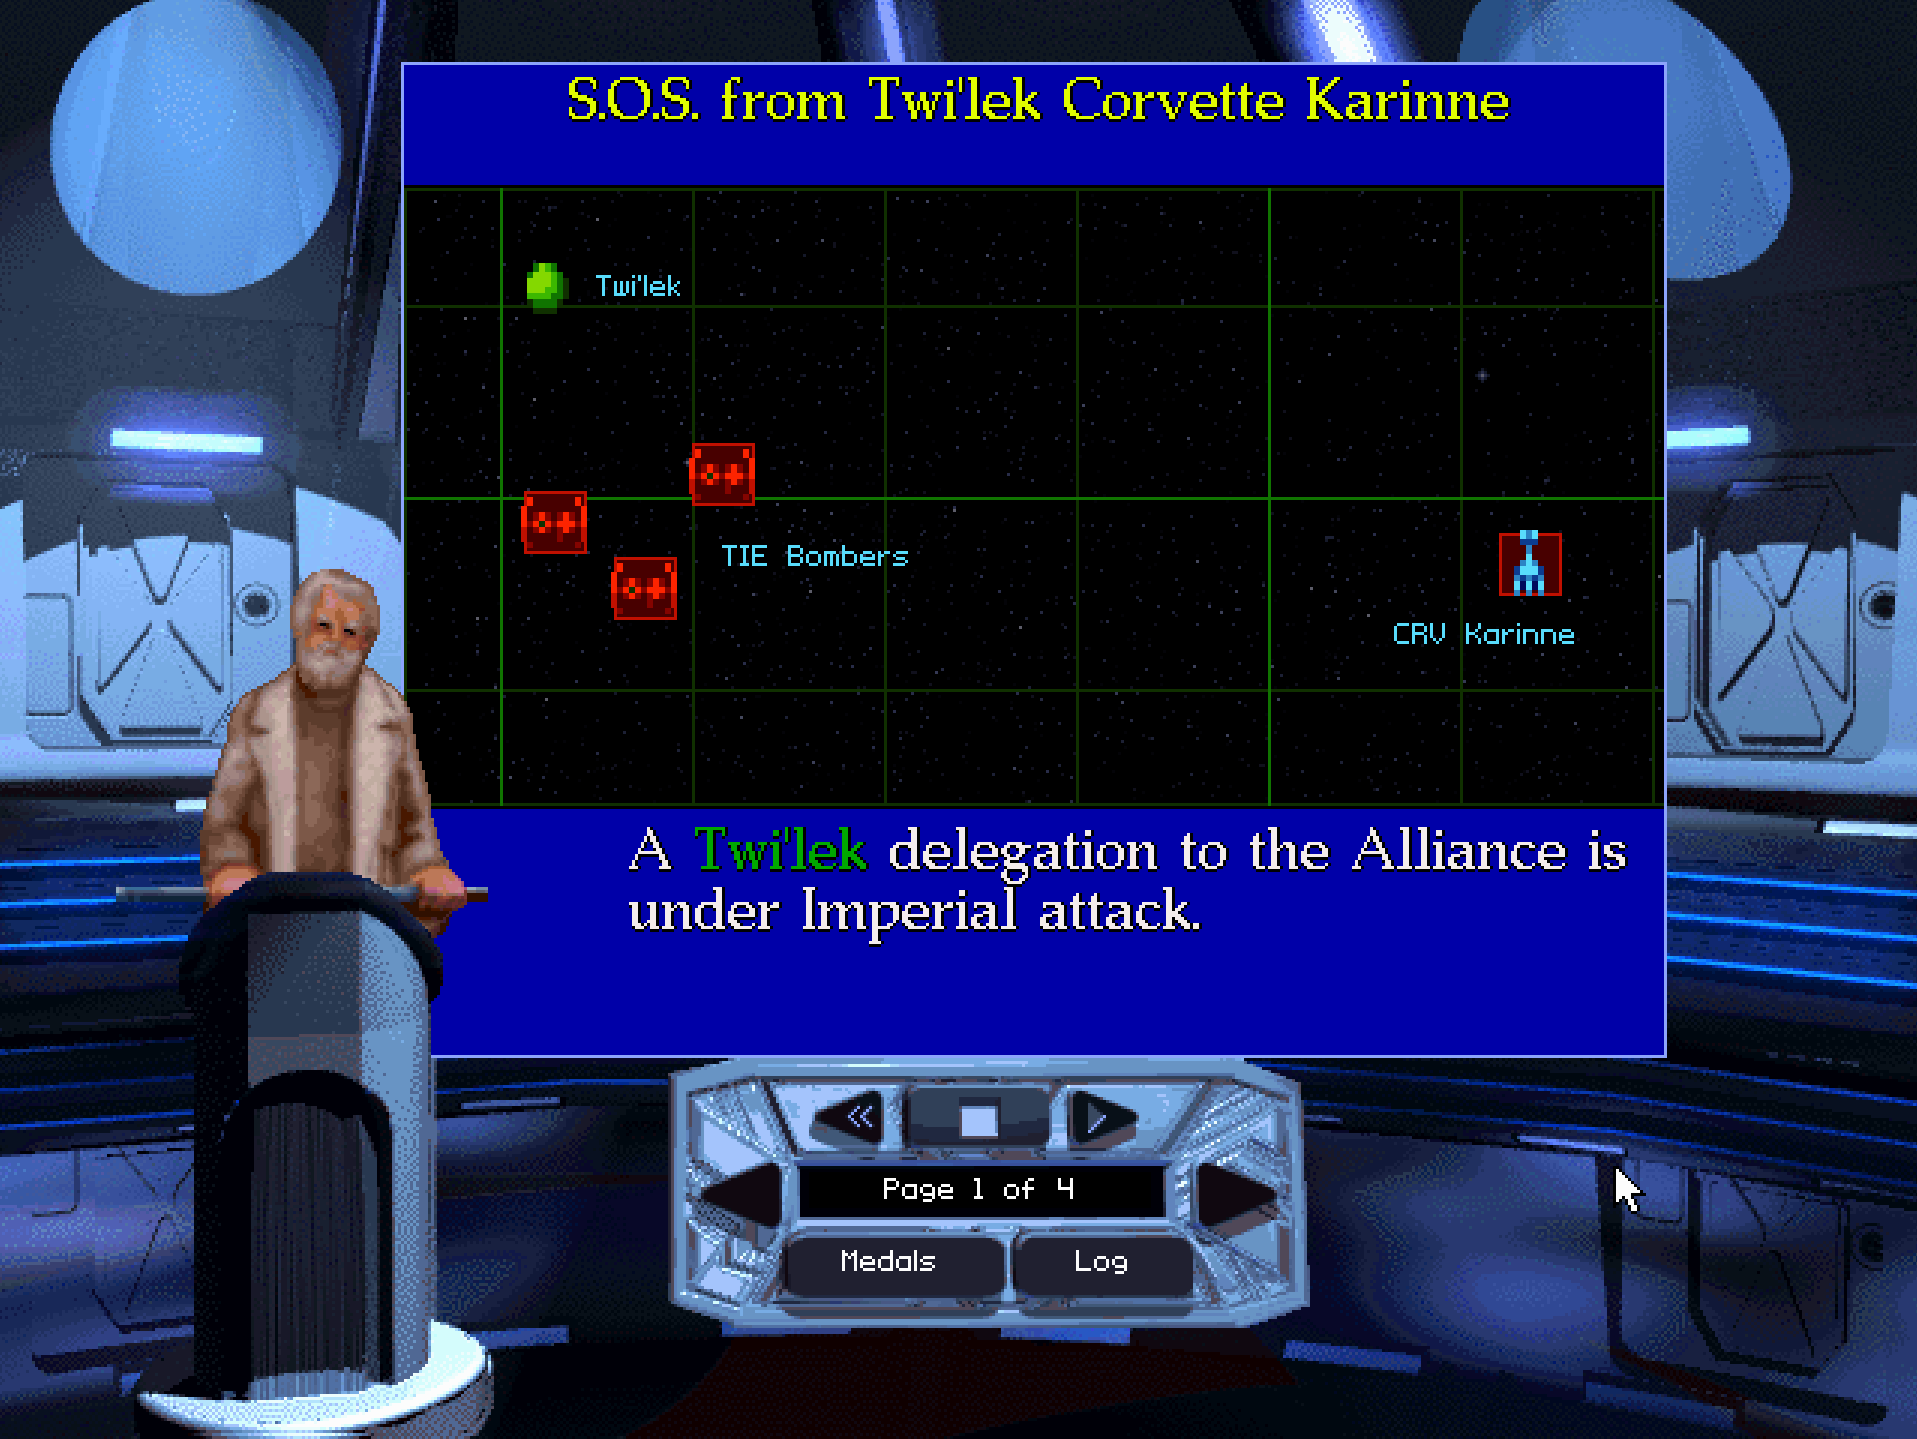 General Dodonna is puzzled at the odd choice of planet name in the original mission.